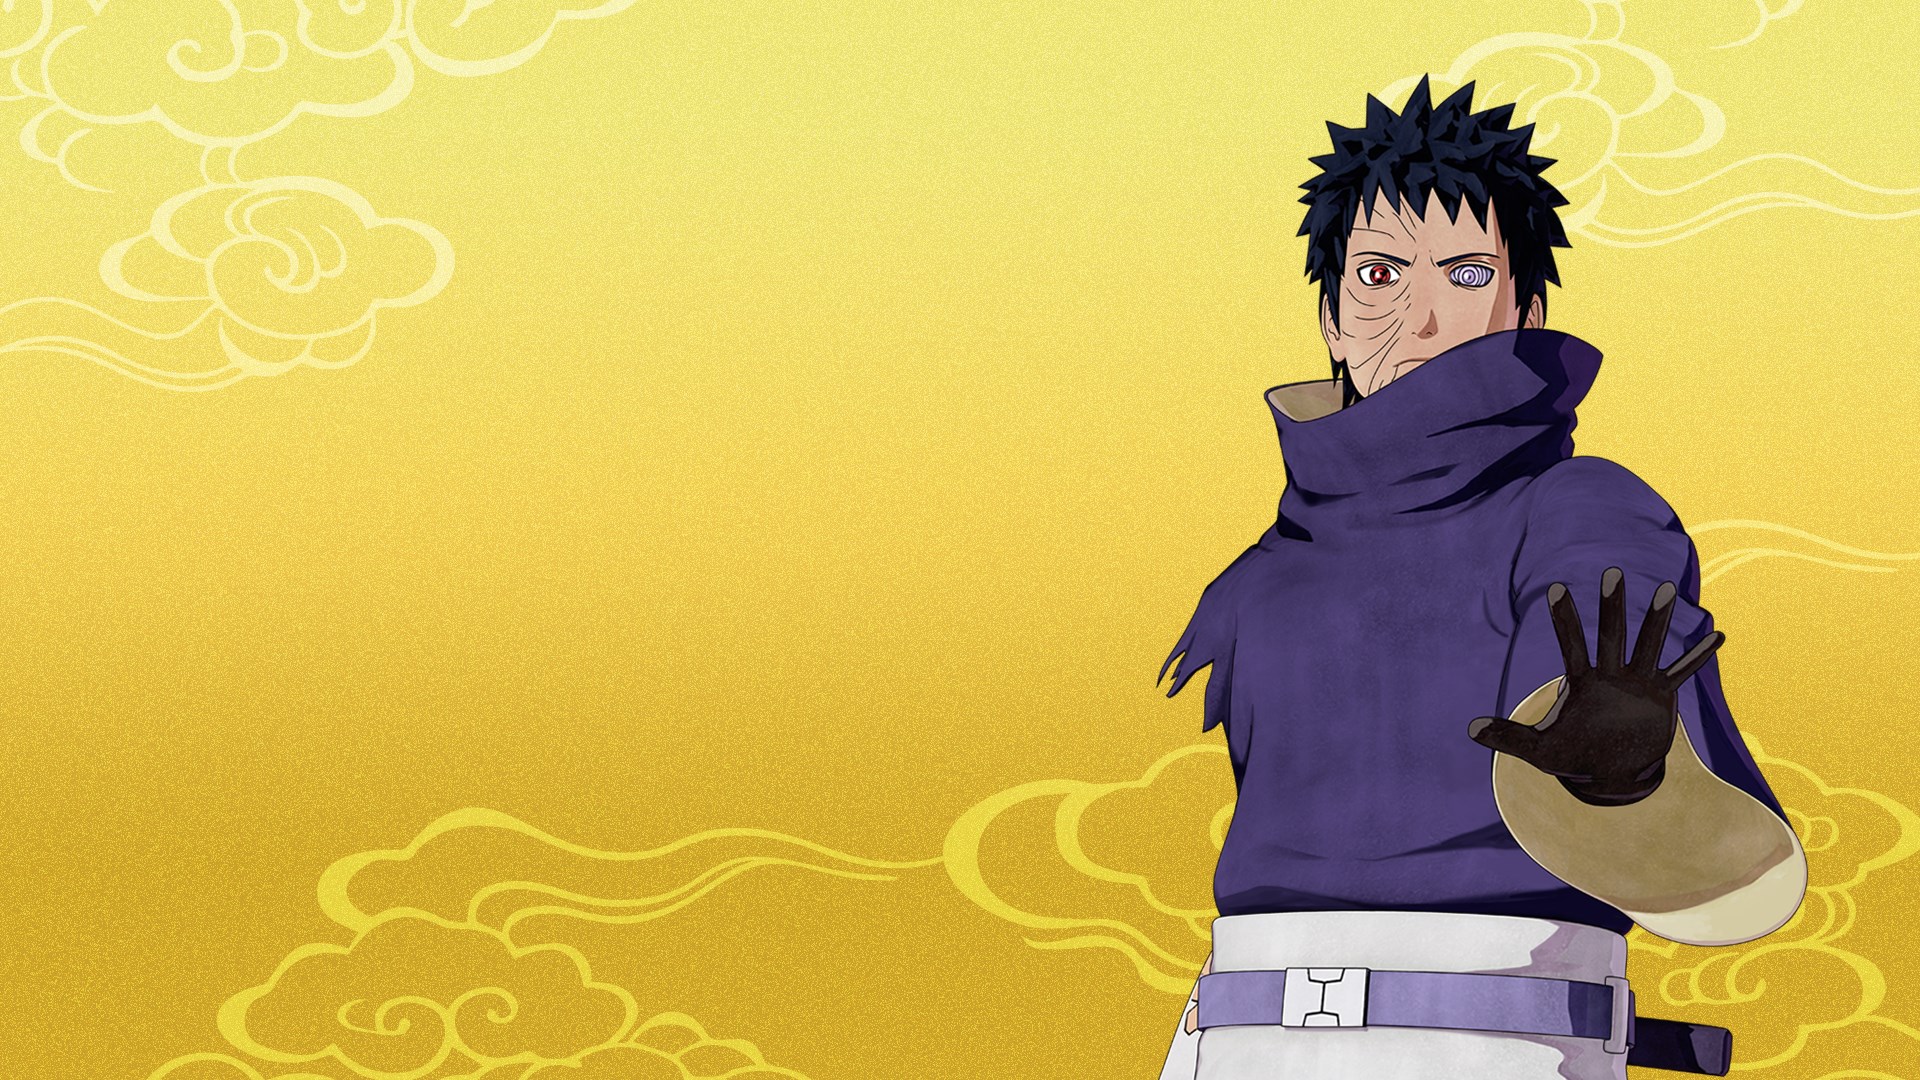 NTBSS: Master Character Training Pack - Obito Uchiha (Ten Tails)